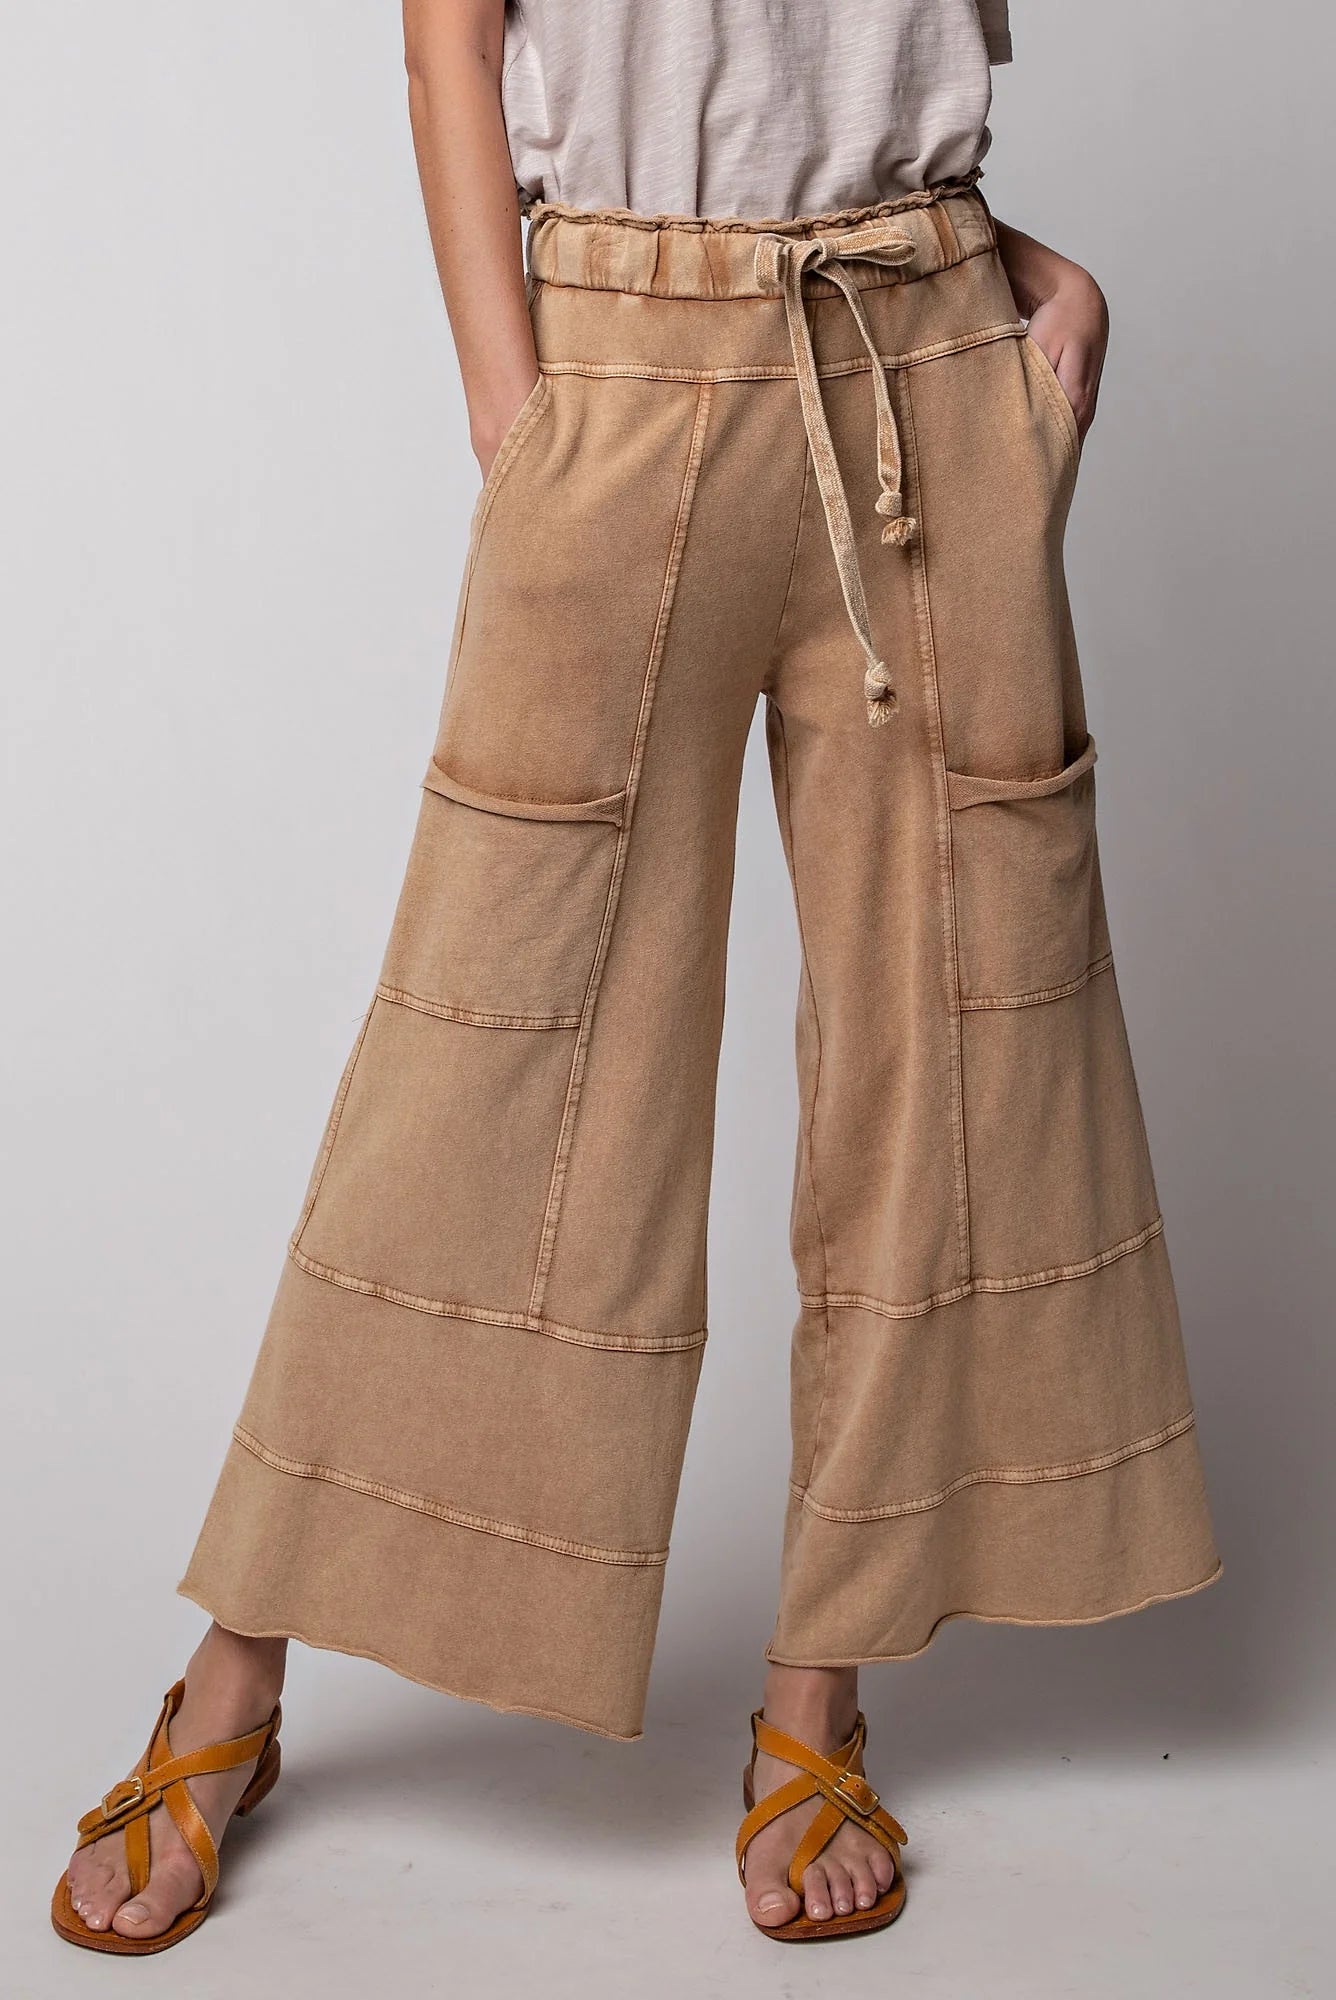 Easel Mineral Washed Terry Knit Pants